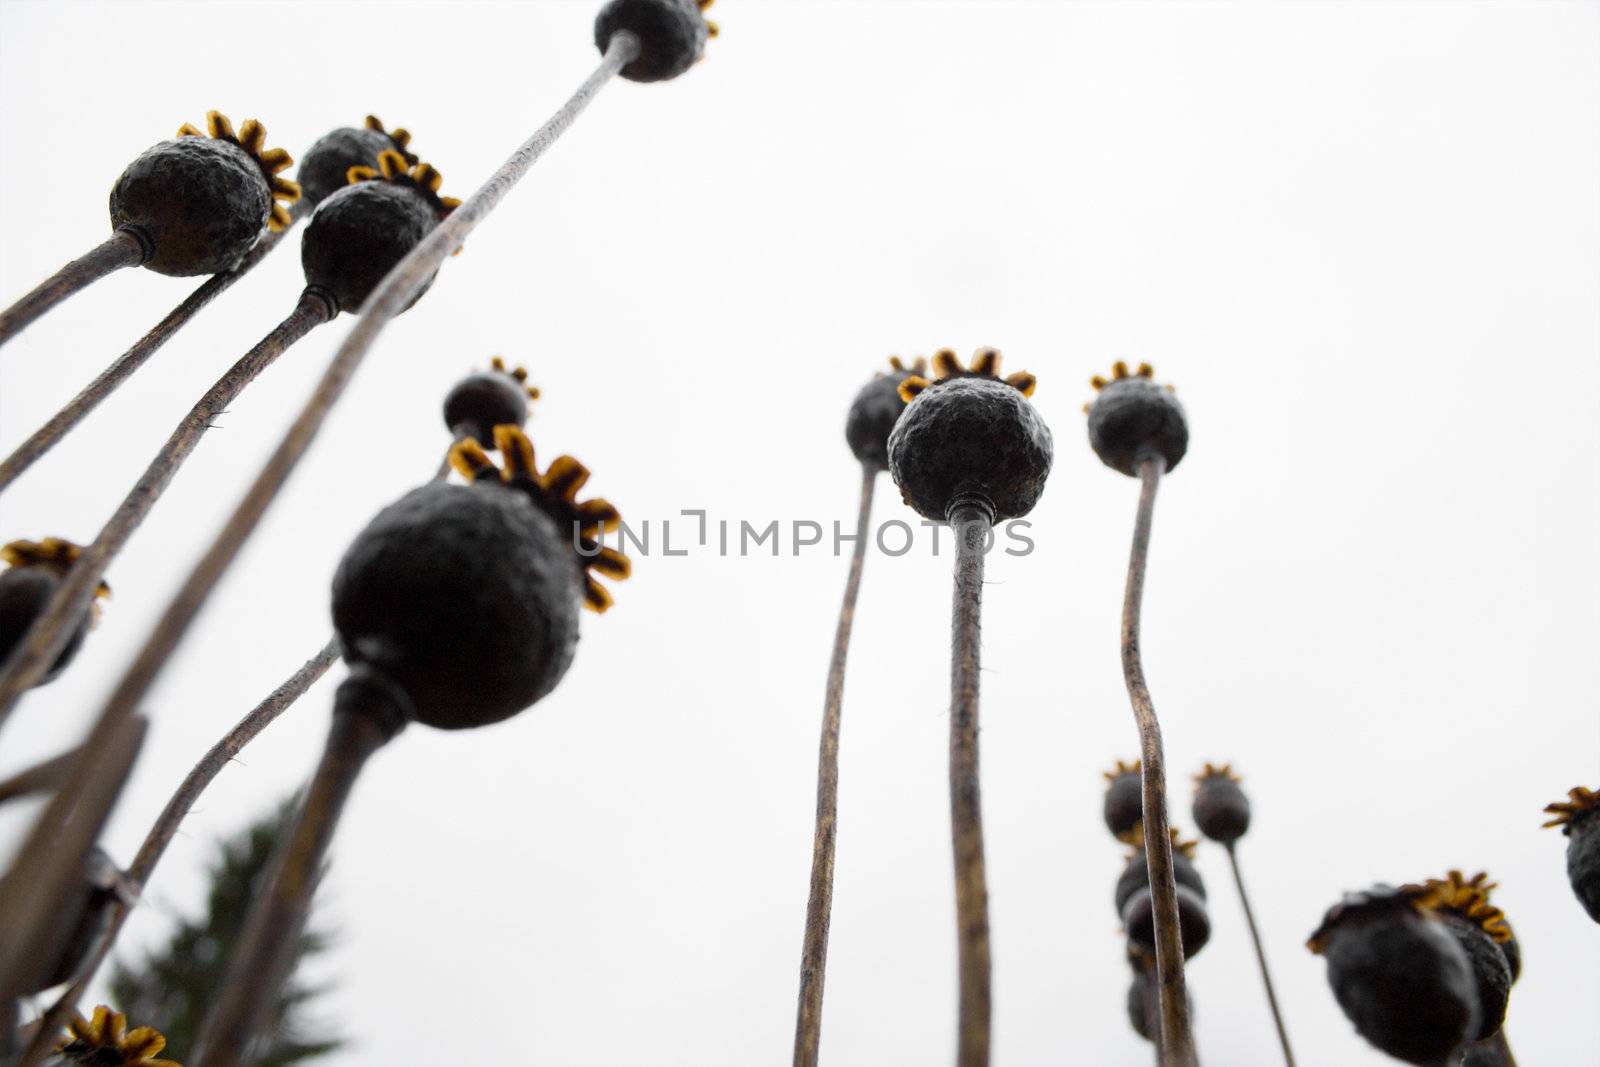 A close-up extremely rakurs photo of dry opium plant (poppy) in autumn 
dull day